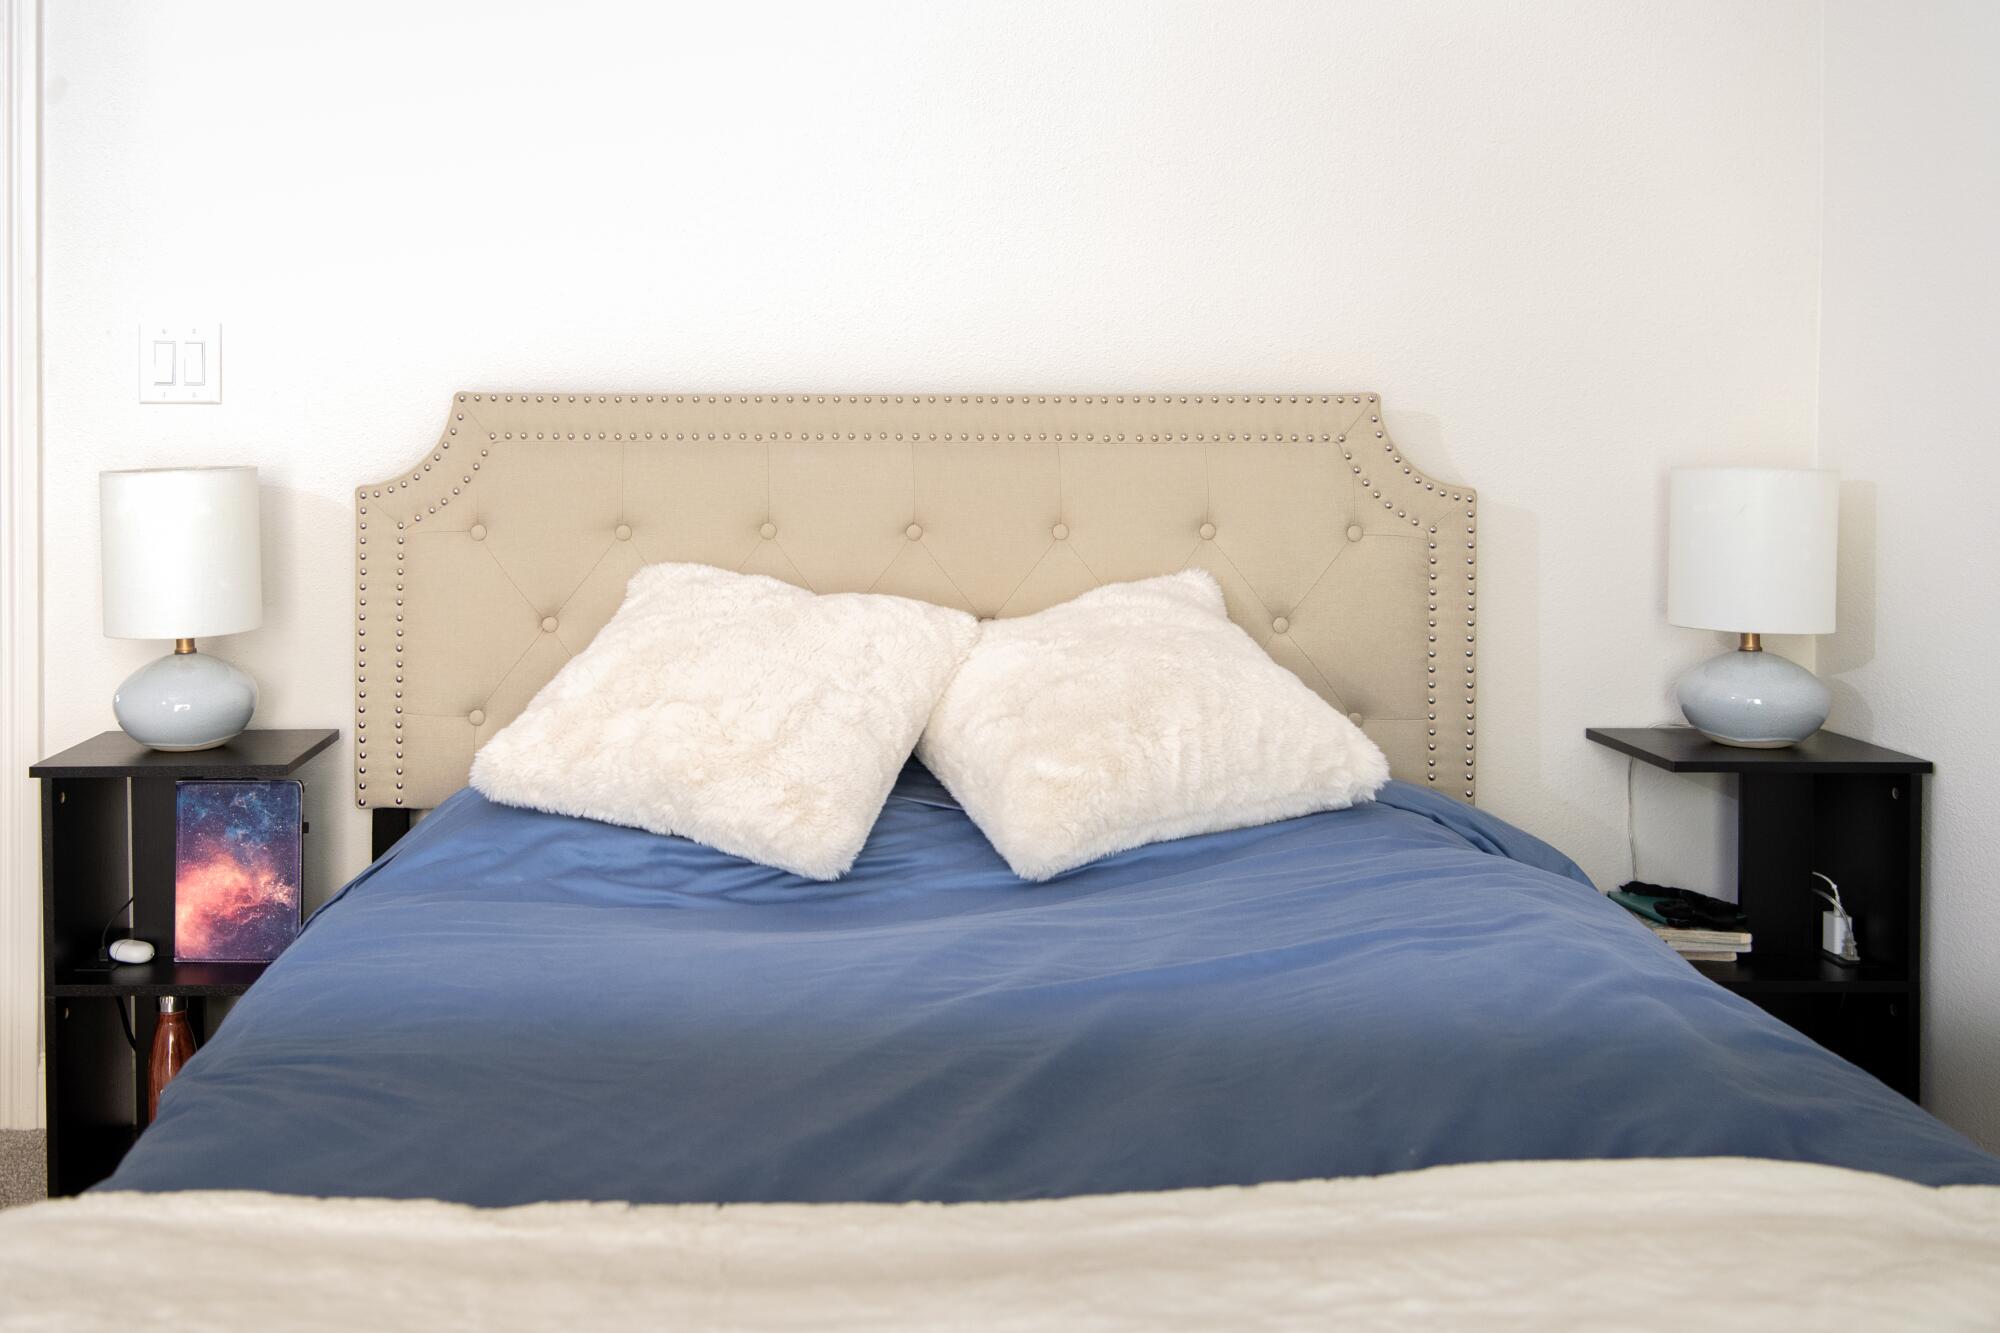 A bed with gray headboard, blue covers and white pillows in a bedroom.